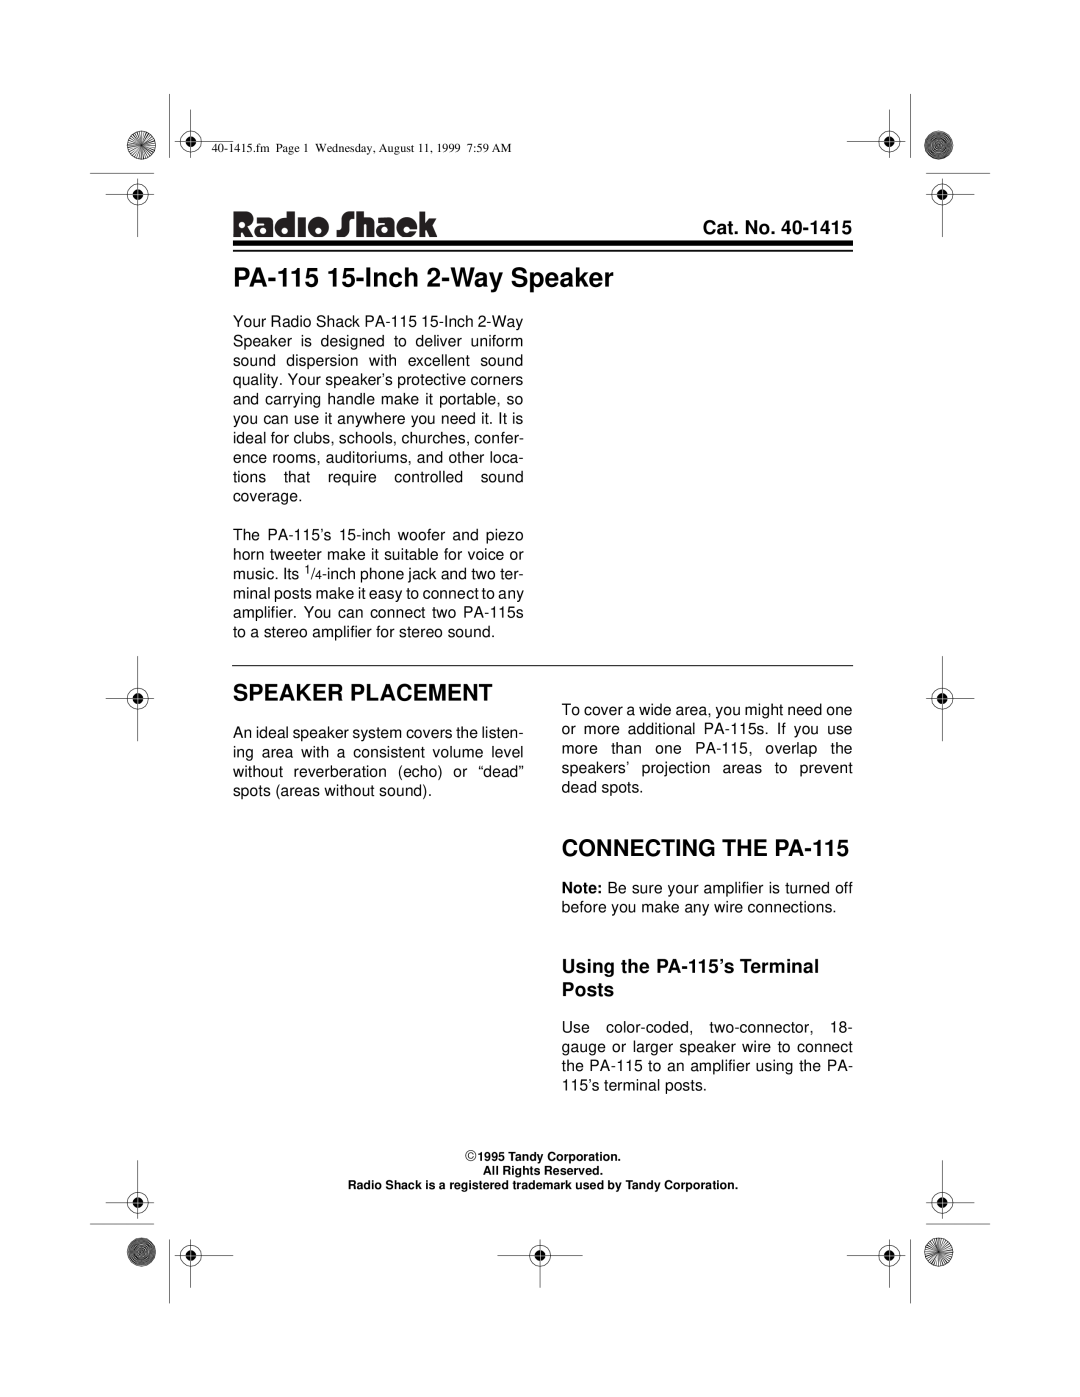 Radio Shack manual Speaker Placement, CONNECTING THE PA-115, Cat. No, Using the PA-115’sTerminal Posts 